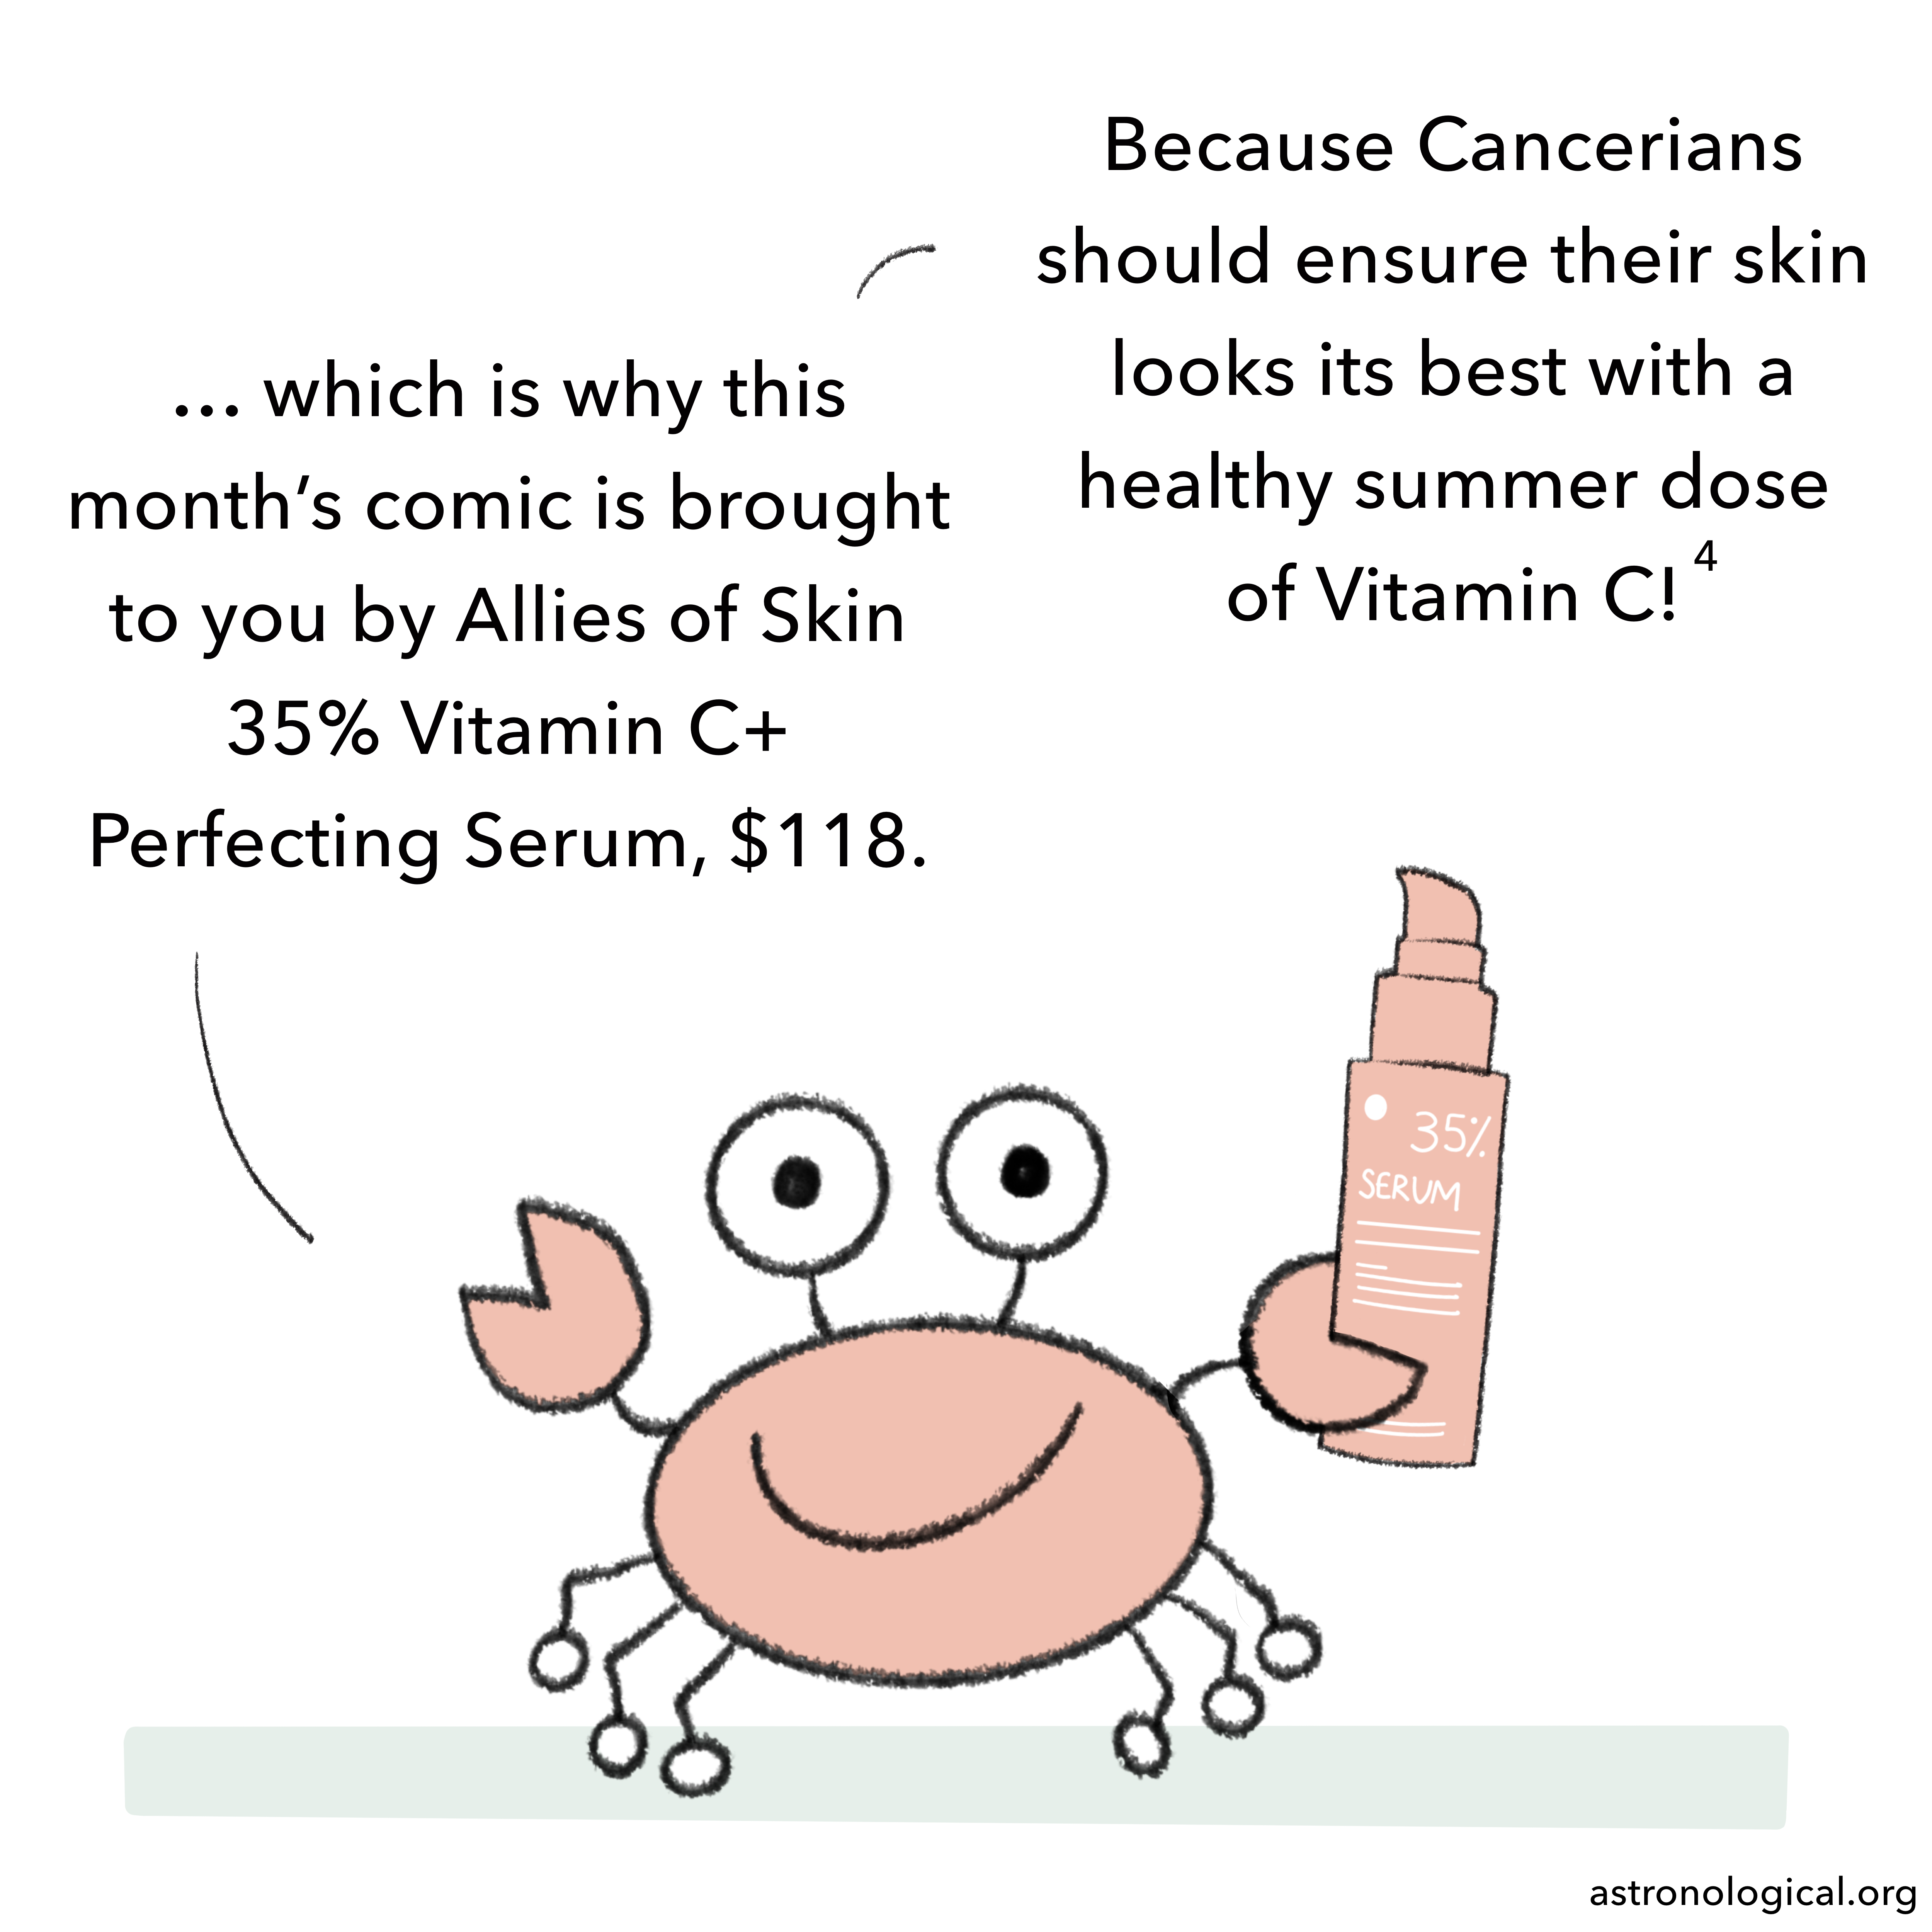 We now see a close up of the crab holding a bottle of serum and talking like a salesman: which is why this month’s comic is brought to you by Allies of Skin 35% Vitamin C+ Perfecting Serum, $118. Because Cancerians should ensure their skin looks its best with a healthy summer dose of Vitamin C!